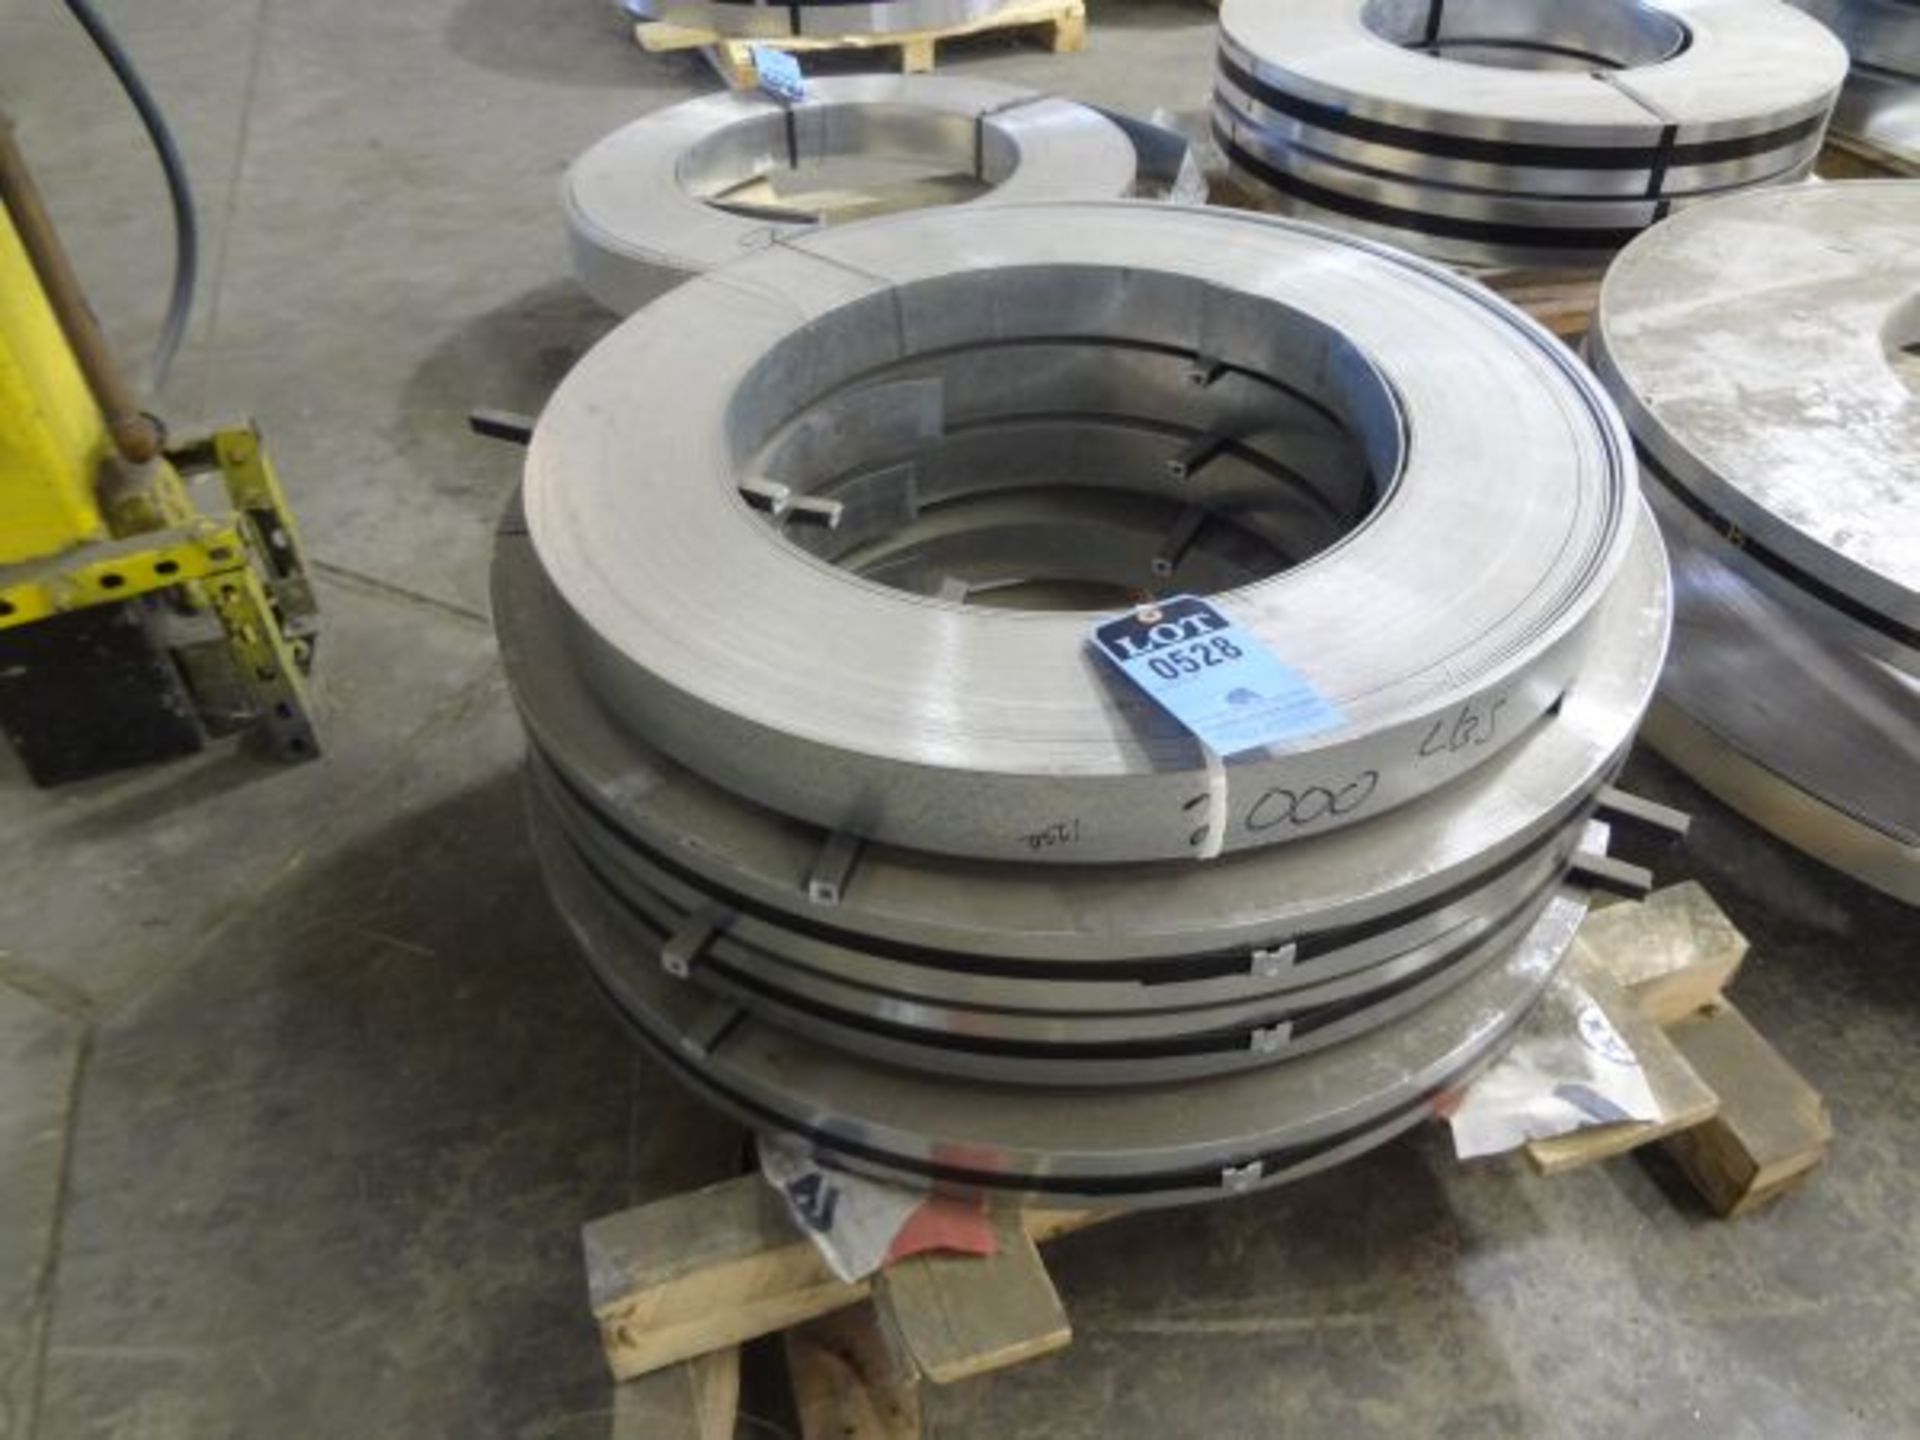 COILS 12 GA. X 2-3/4" GALVANIZED SKIDDED STEEL, APPROX. TOTAL WEIGHT 2,000 LB.